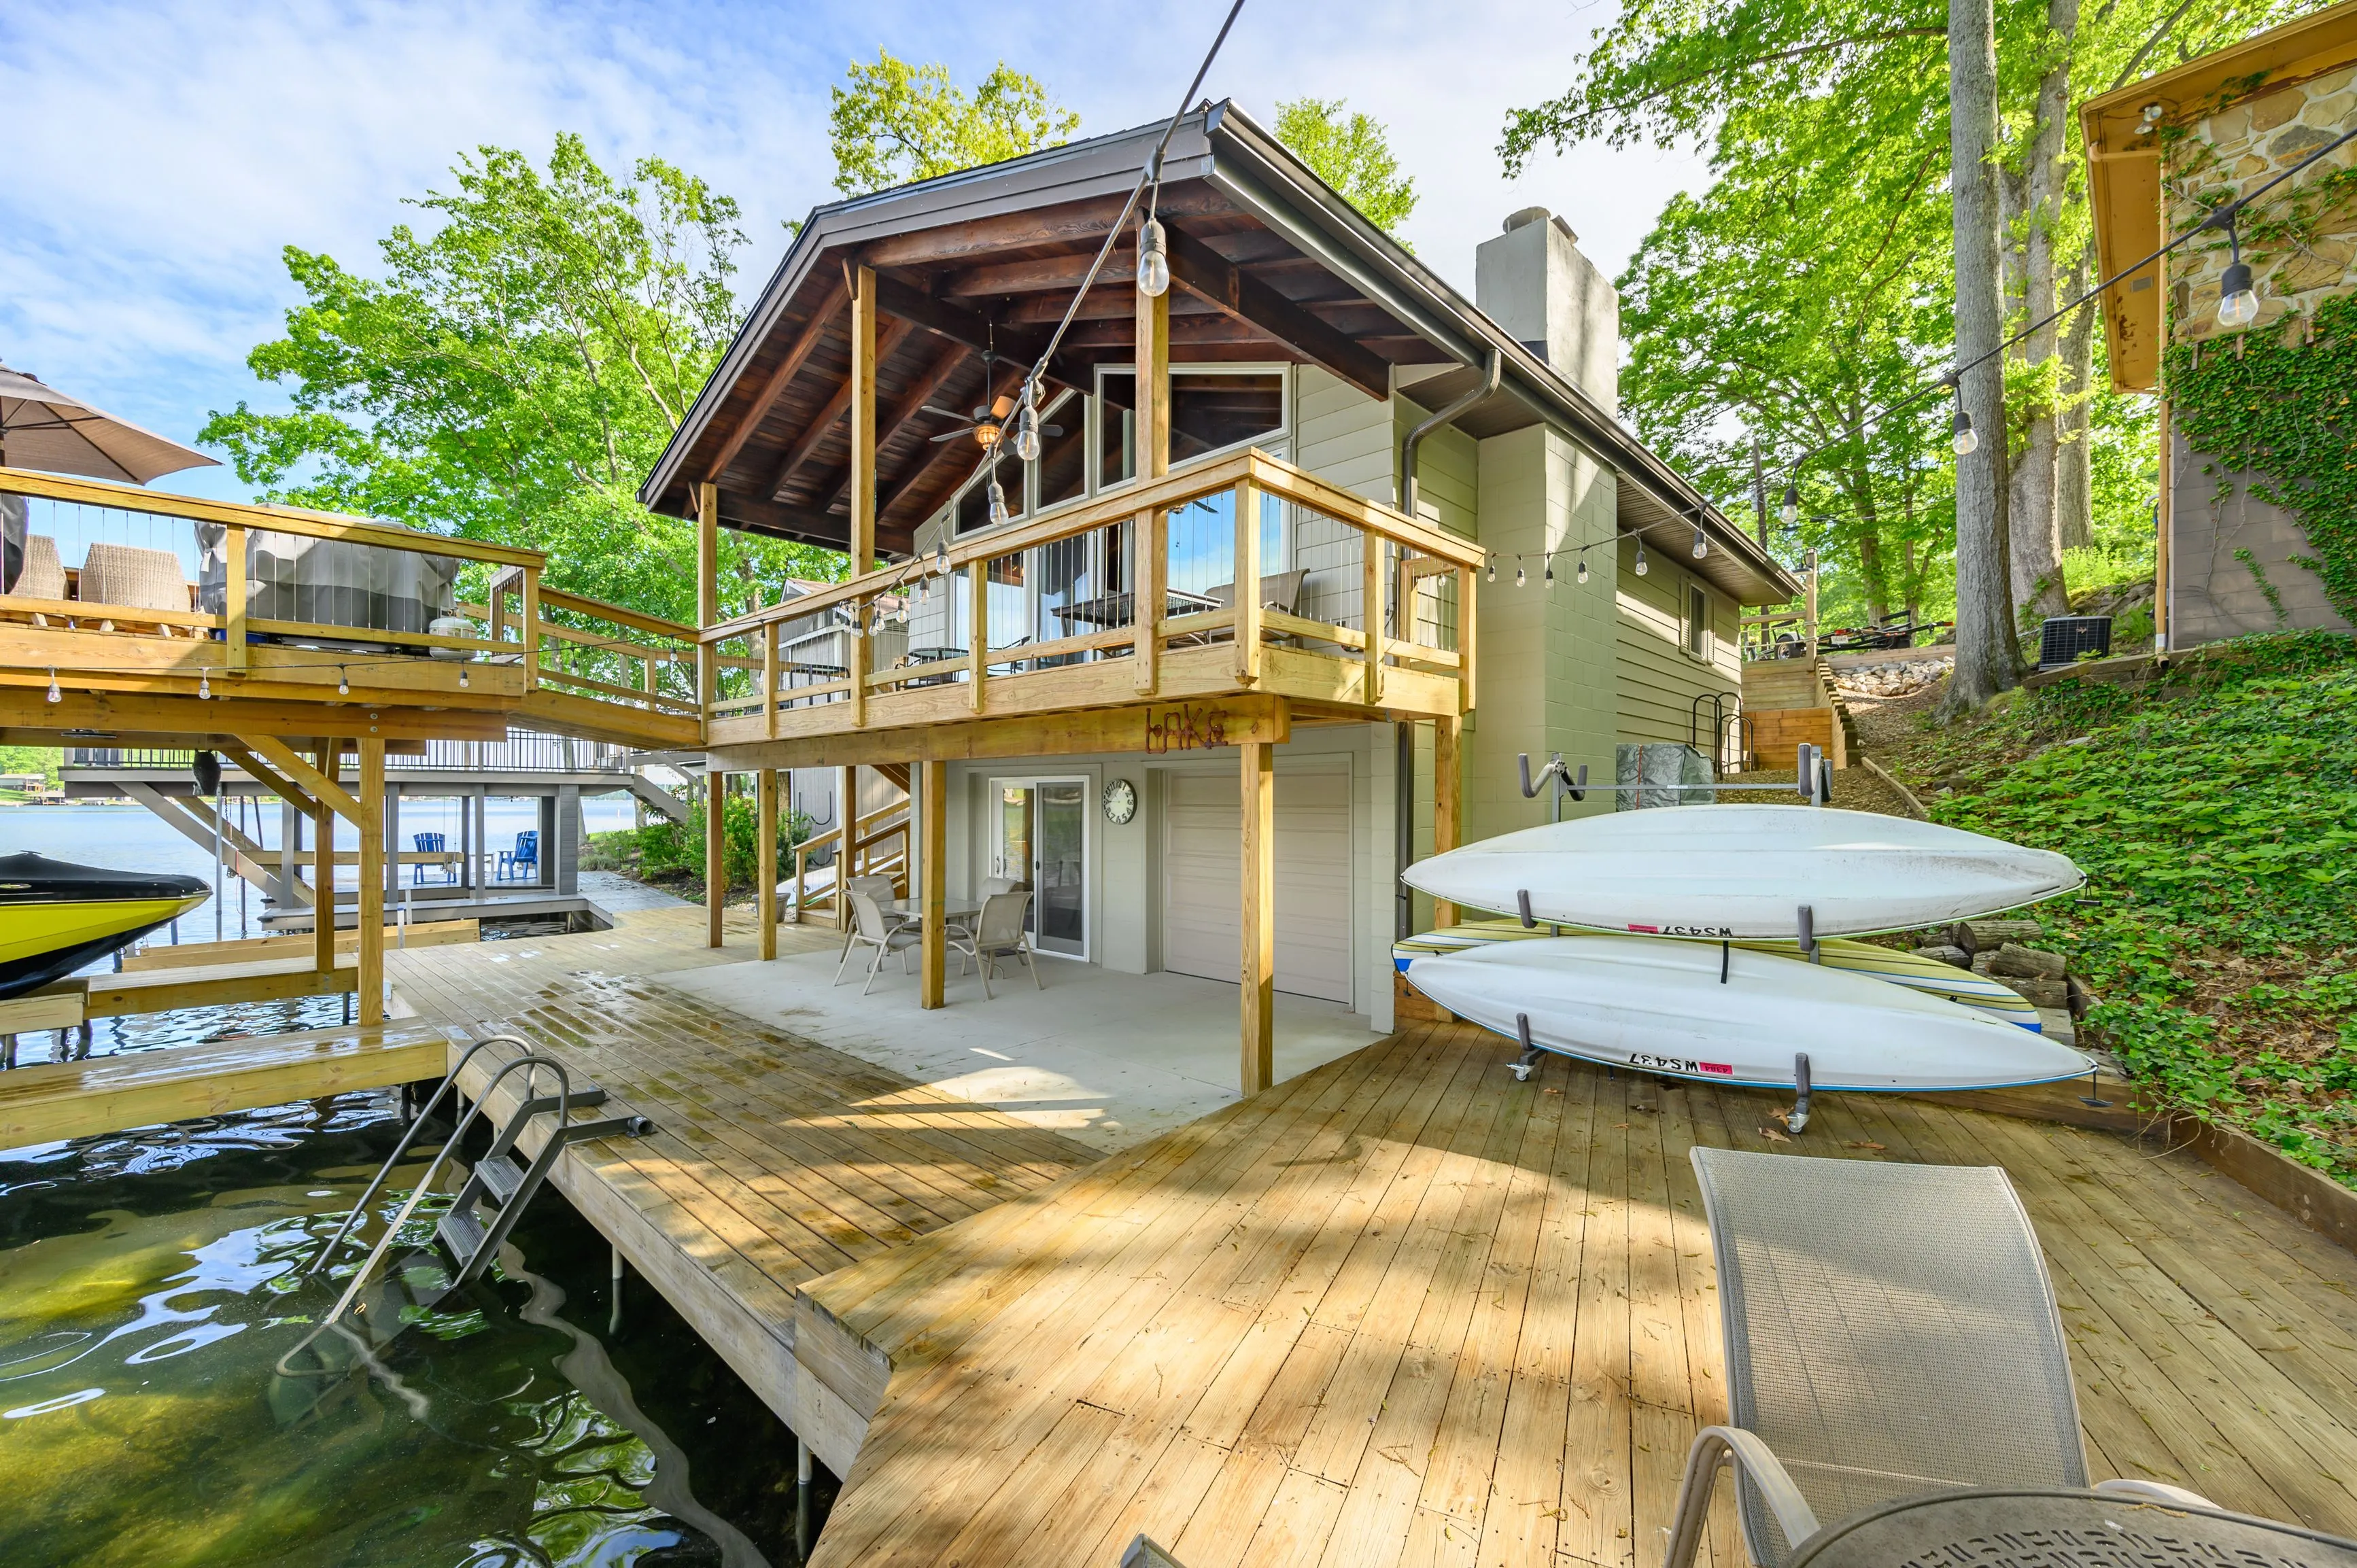 Lakeside house with a boat dock and multiple decks among green trees on a sunny day.